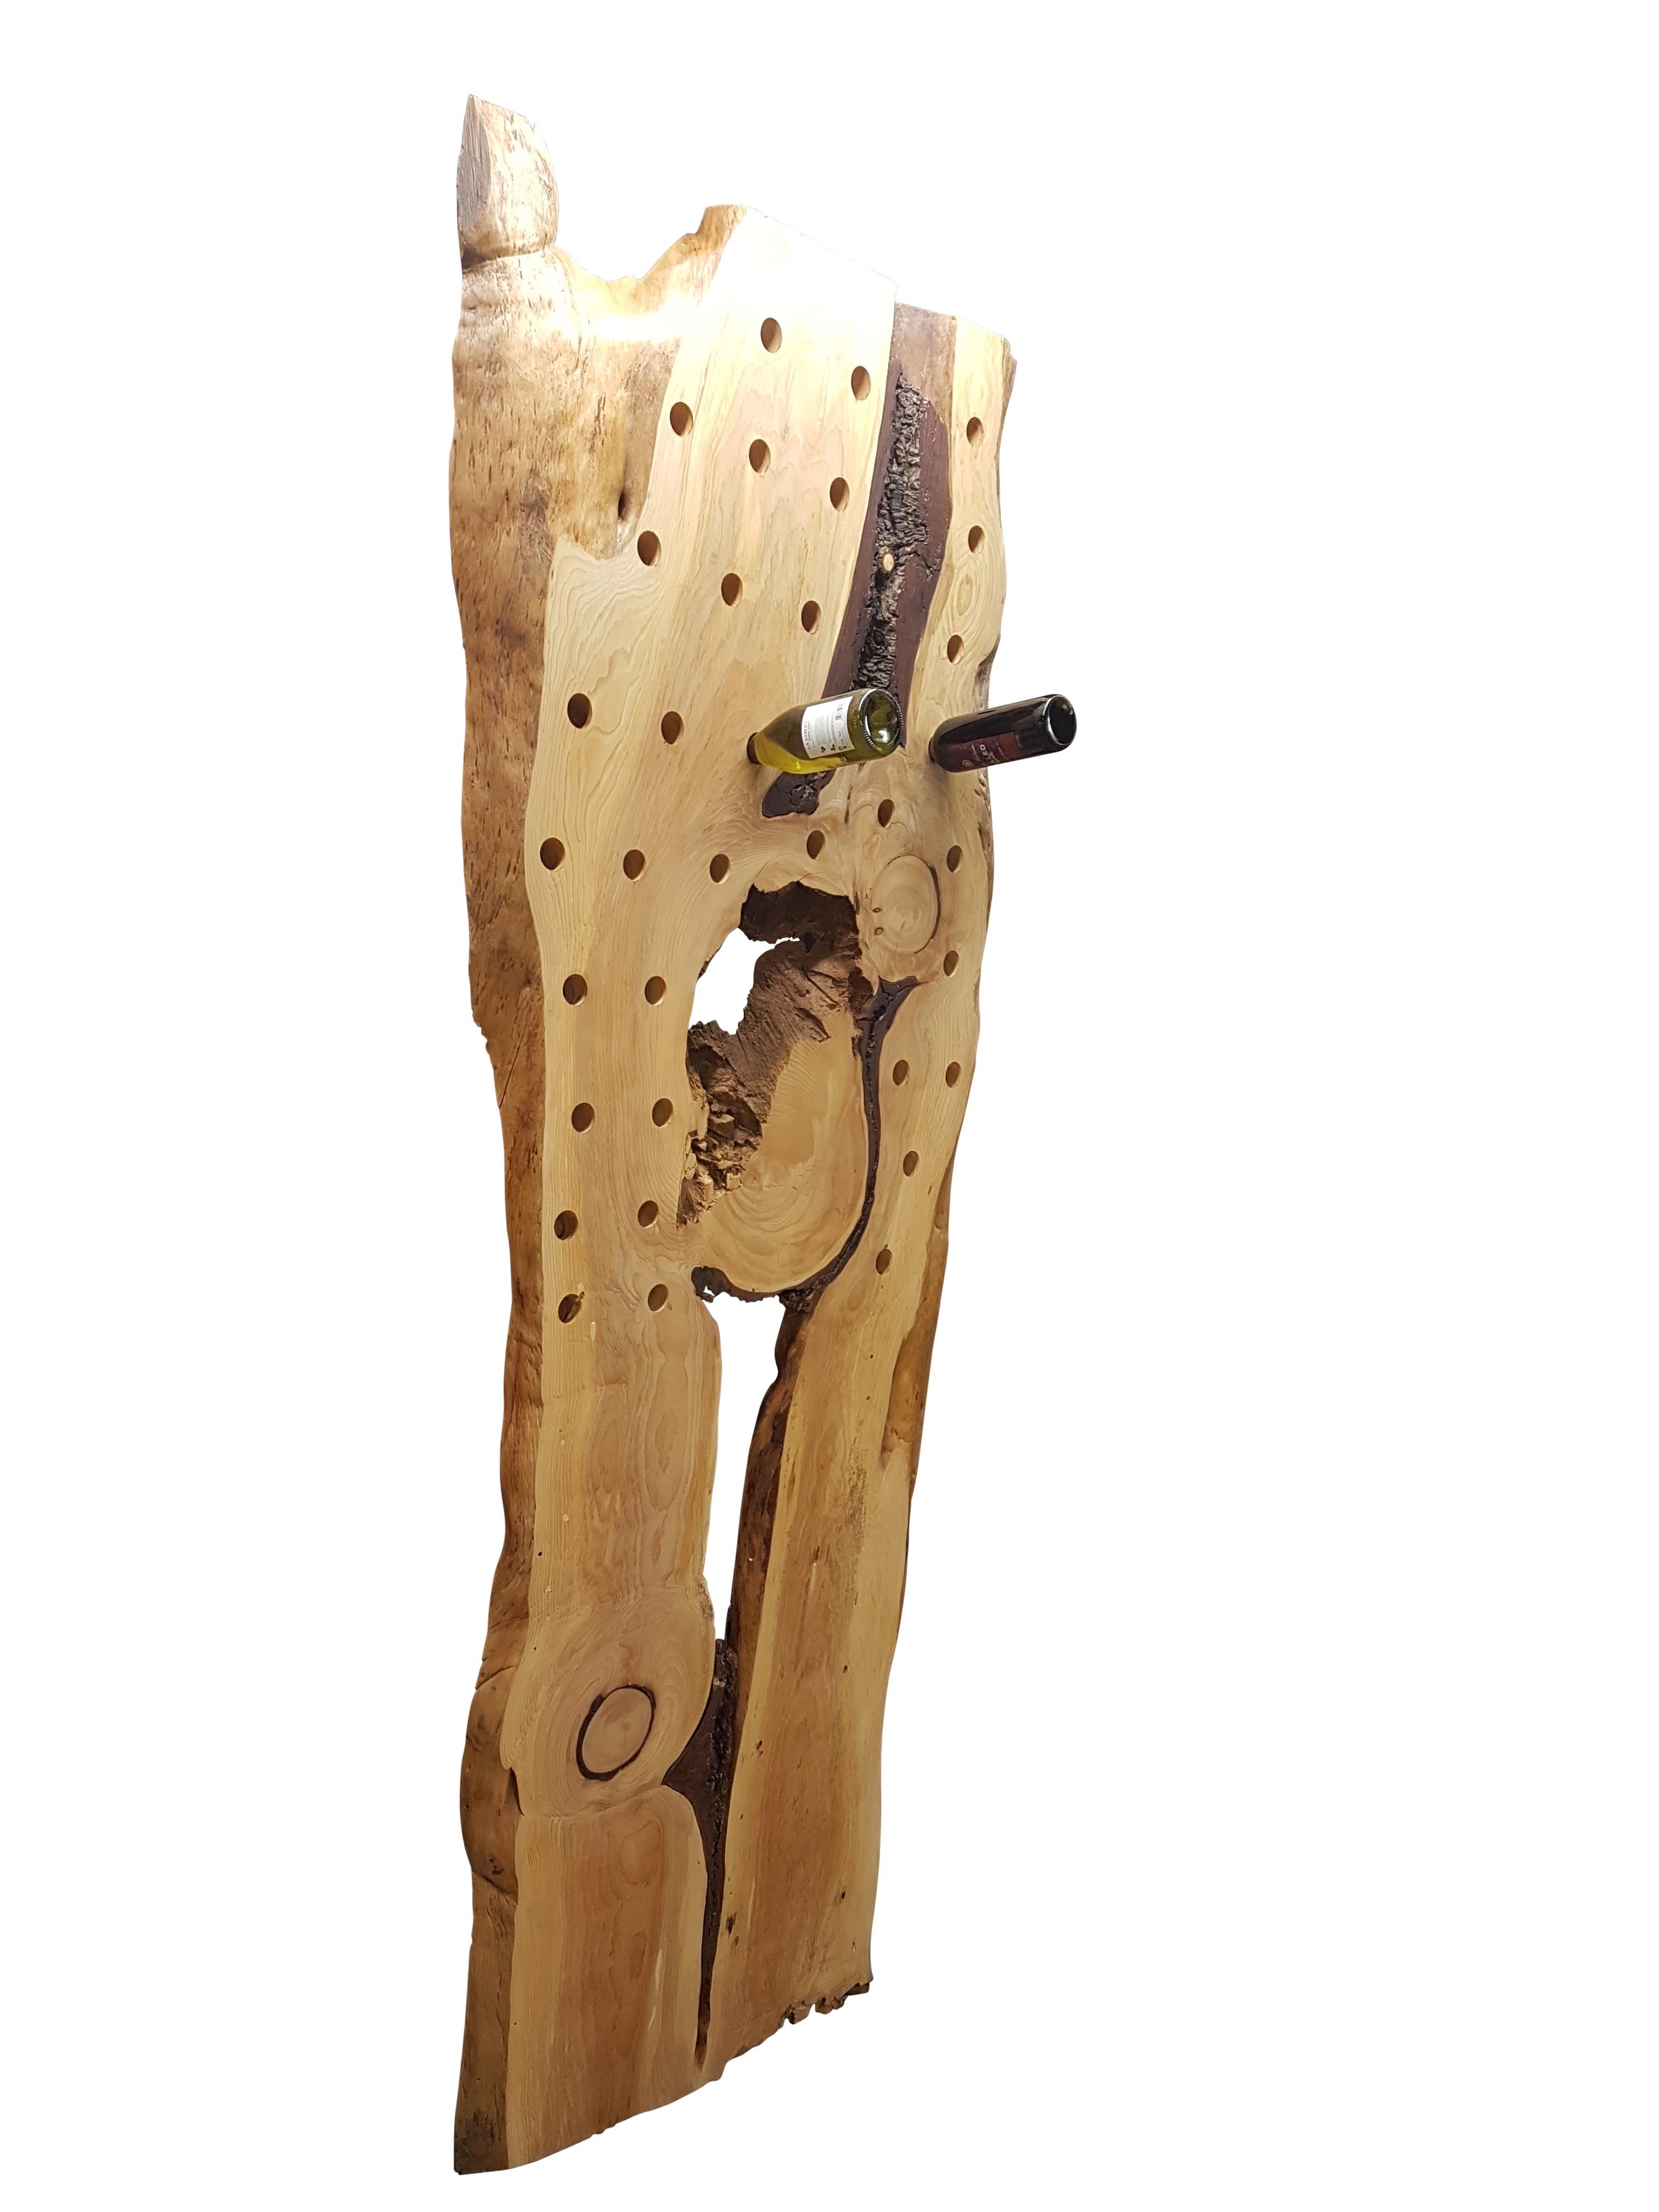 Hand-Crafted Tall Bespoke Wine Rack from Select Slab of Cedar of Lebanon For Sale